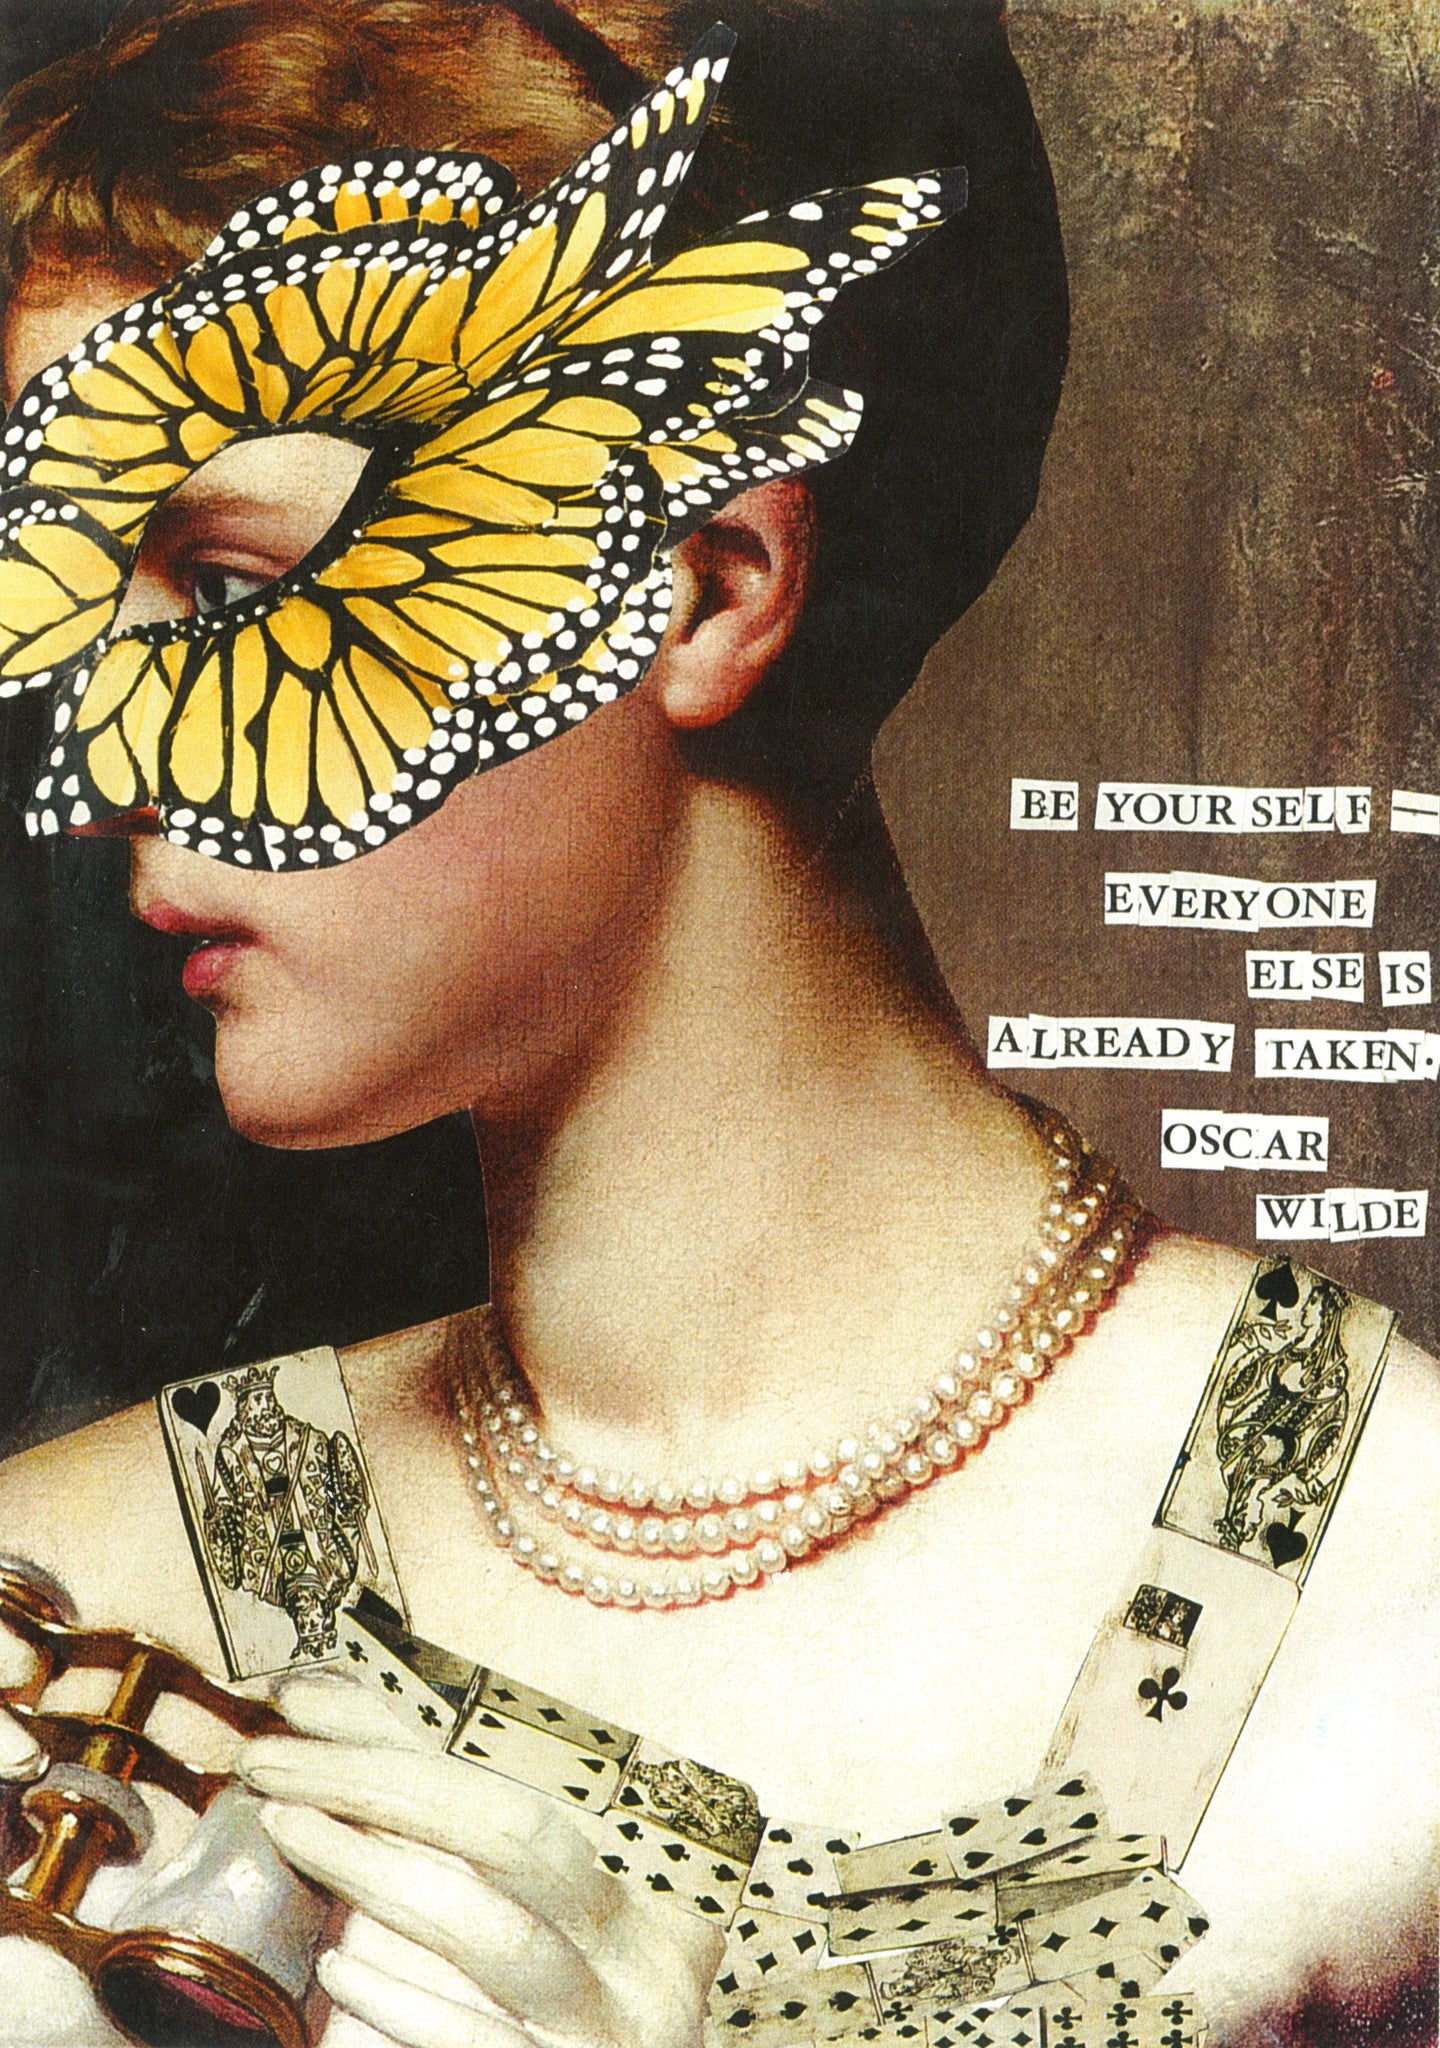 Oscar Wilde Quote Greeting Card